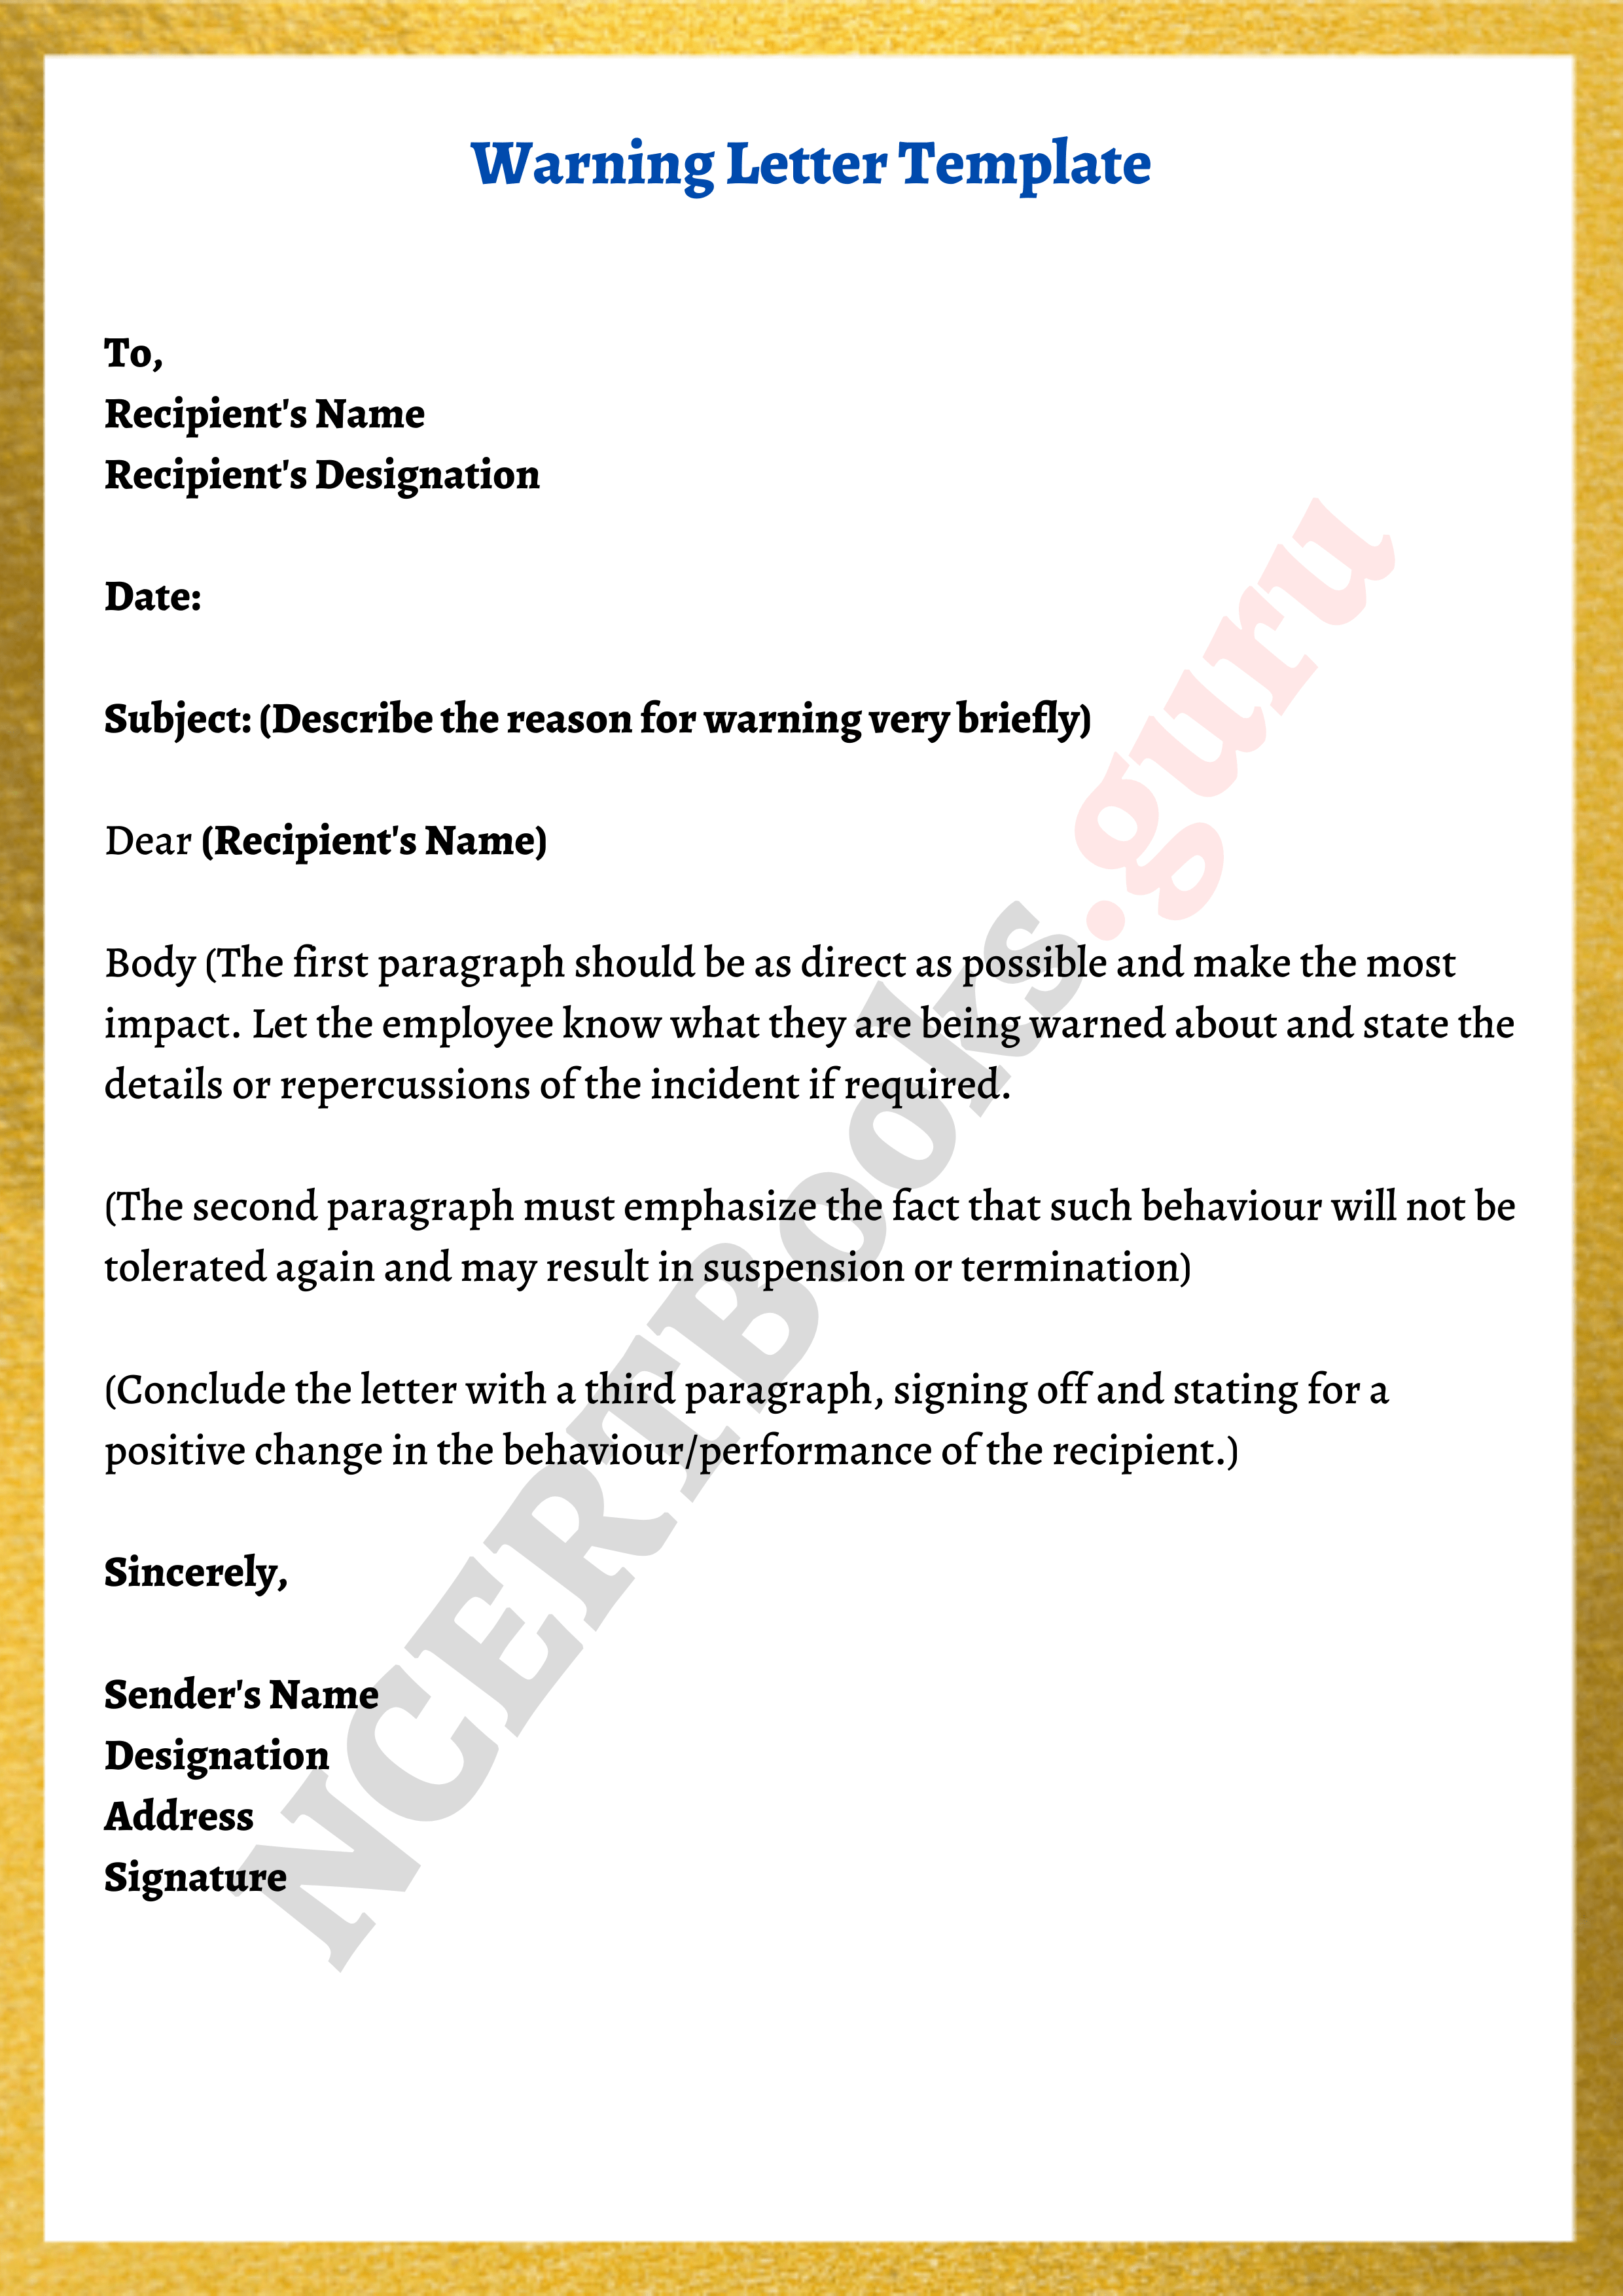 Warning Letter Template Format Sample Example In Pdf - vrogue.co